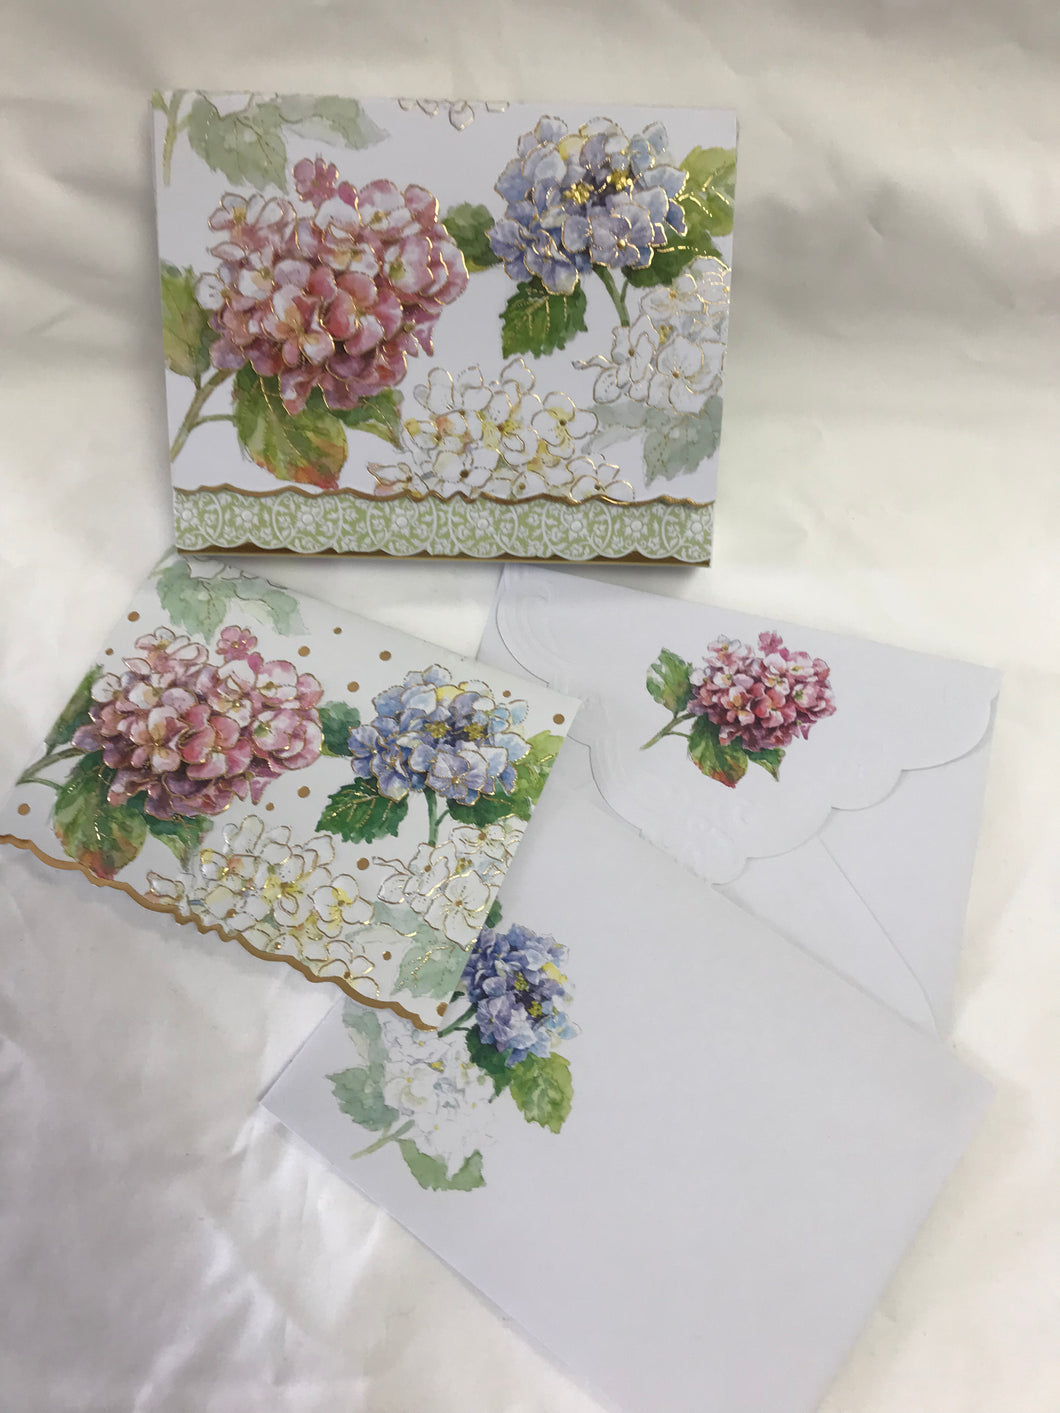 10 Floral Notecards - Pink and Blue Hydrangeas